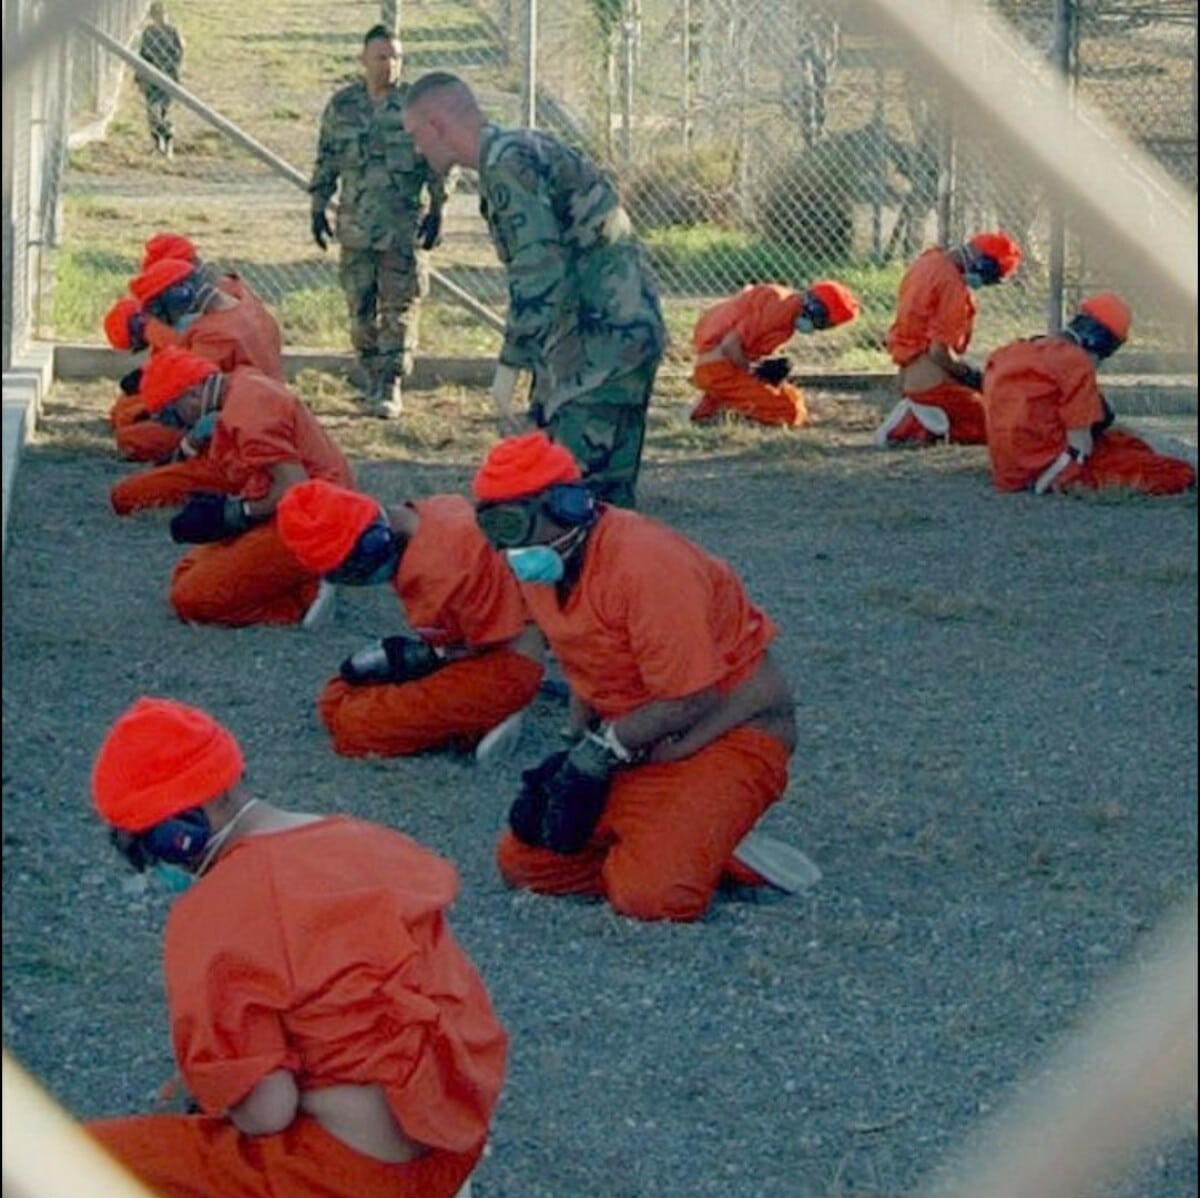 Detainees in orange jumpsuits sit in a holding area under the "watchful eyes" of Military Police at Camp X-Ray at Naval Base Guantanamo Bay, Cuba, during in-processing to the "temporary detention facility" on Jan. 11, 2002. Photo: Shane T. McCoy, U.S. Navy via Wikimedia Commons.